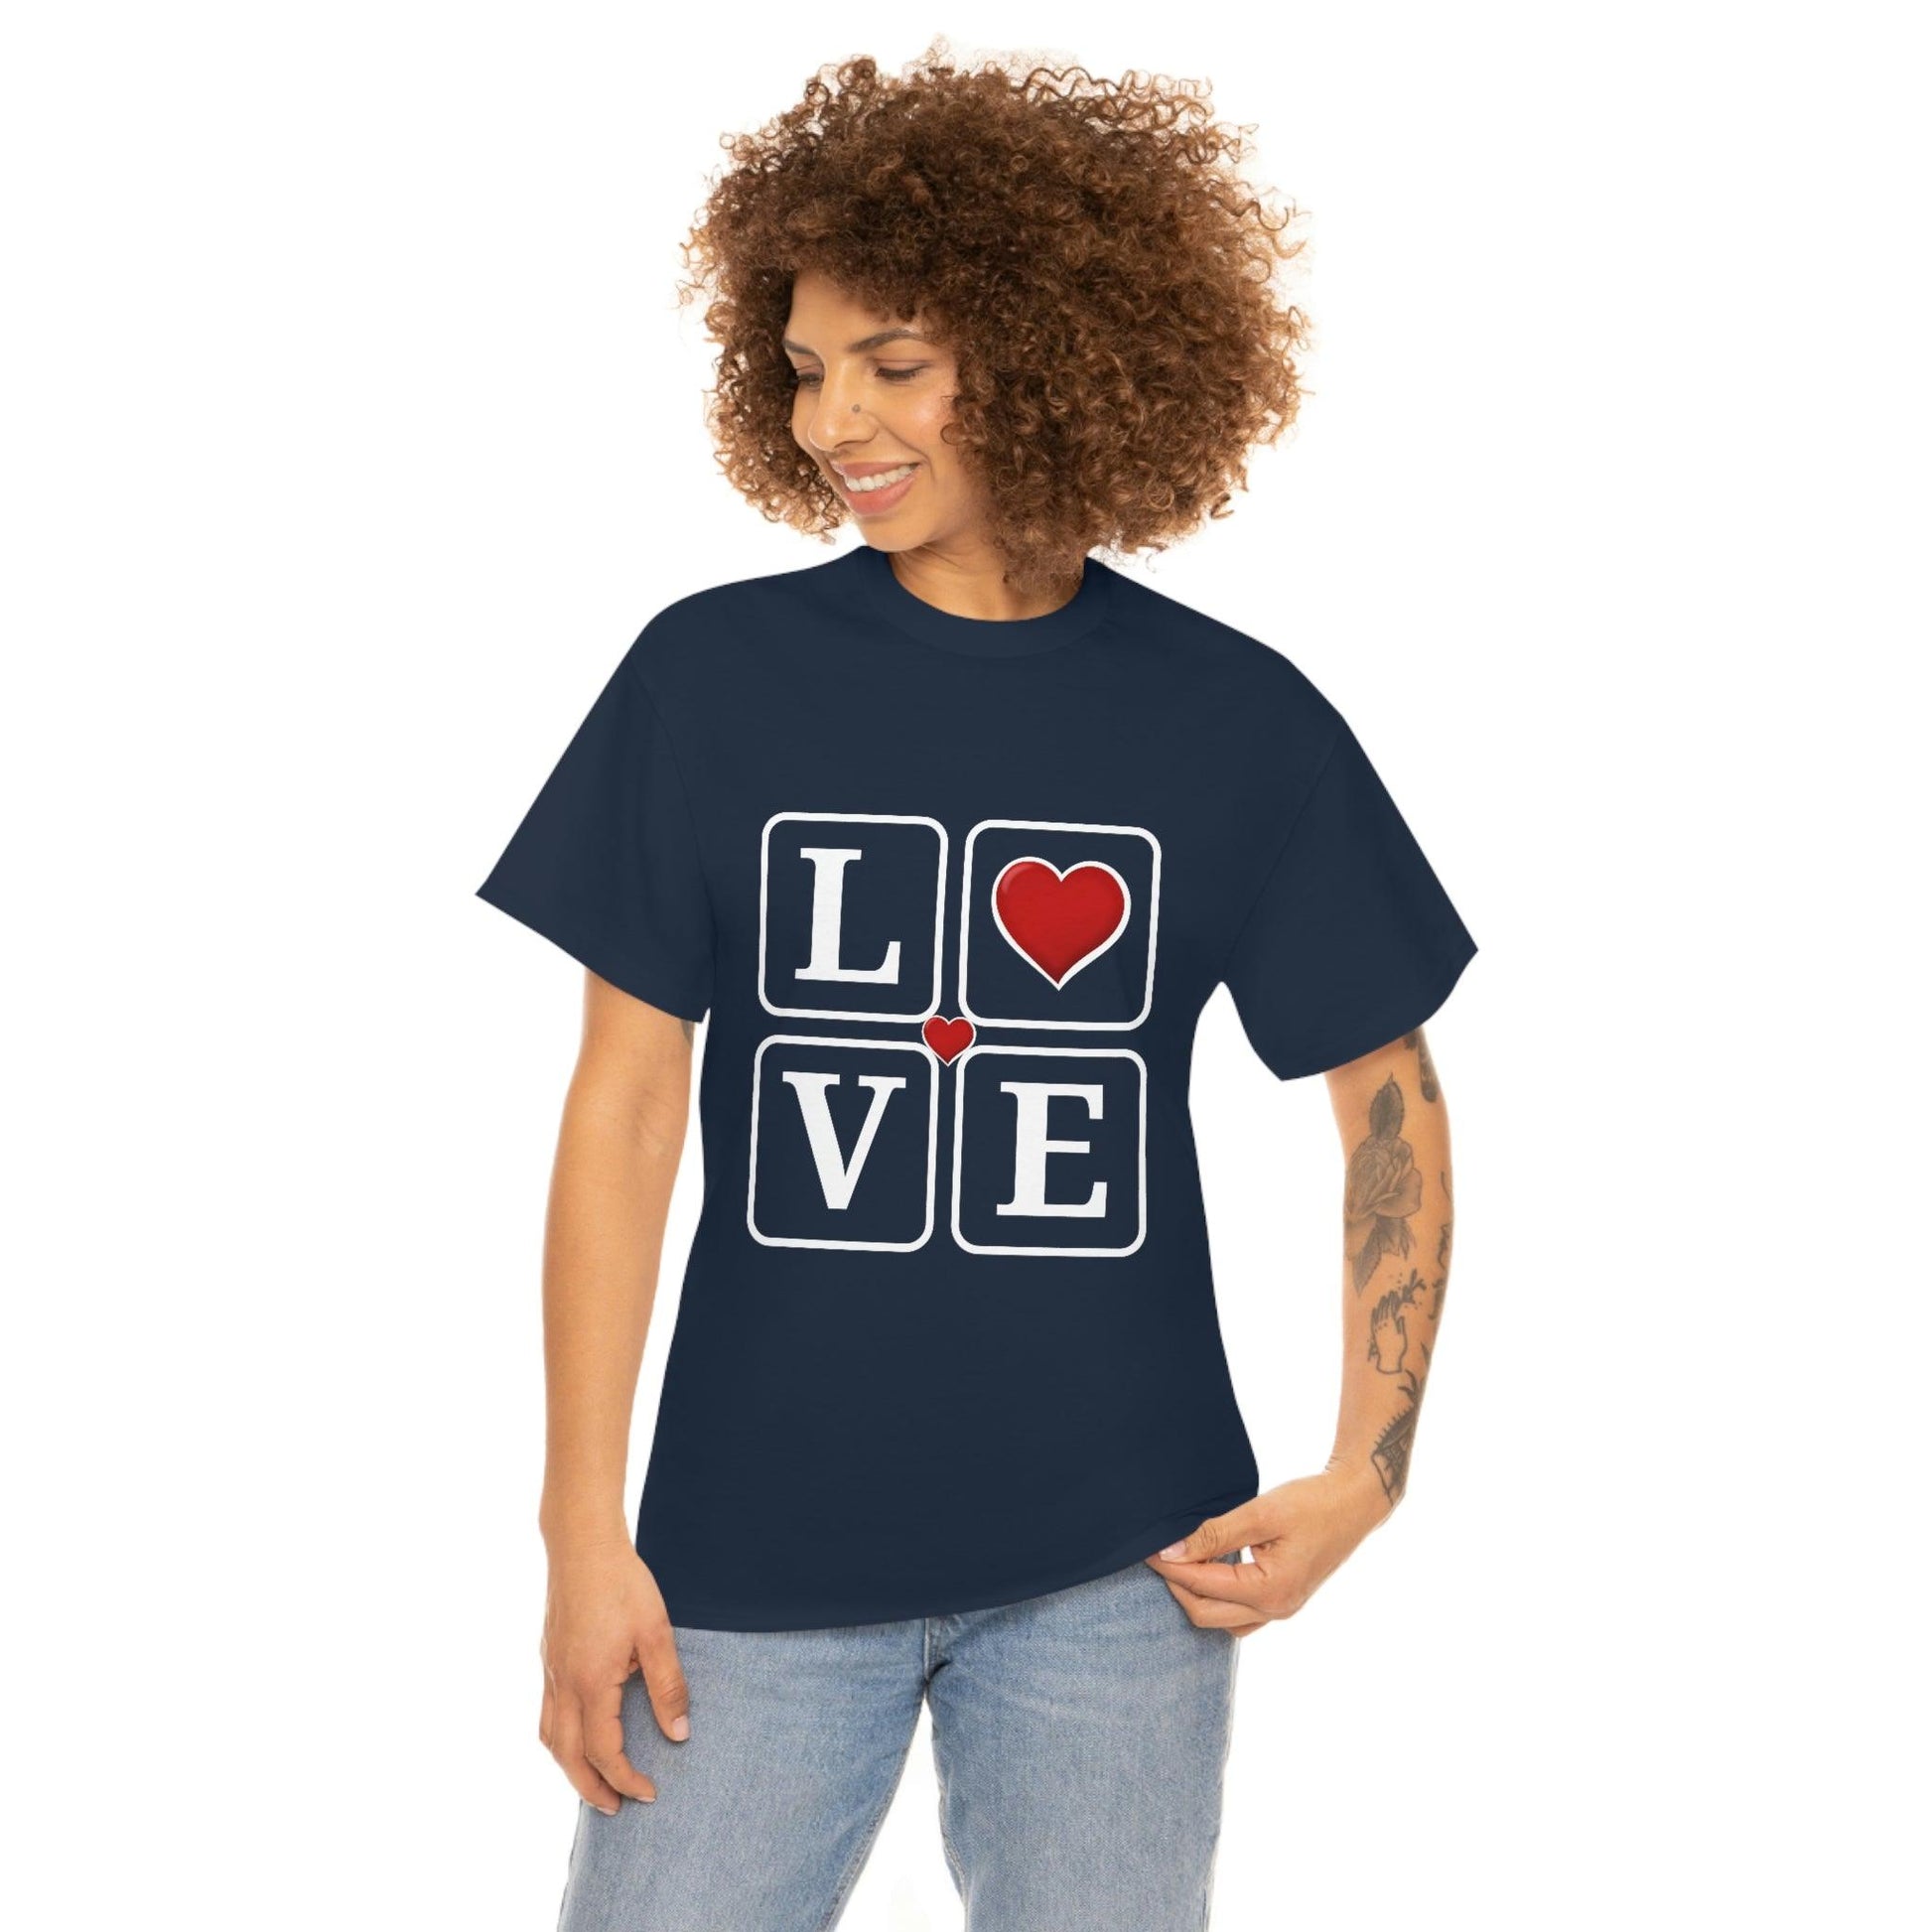 Love square Hearts Shirt, Great Gift for Valentine's day, birthday, engagement, anniversary and many more - Giftsmojo